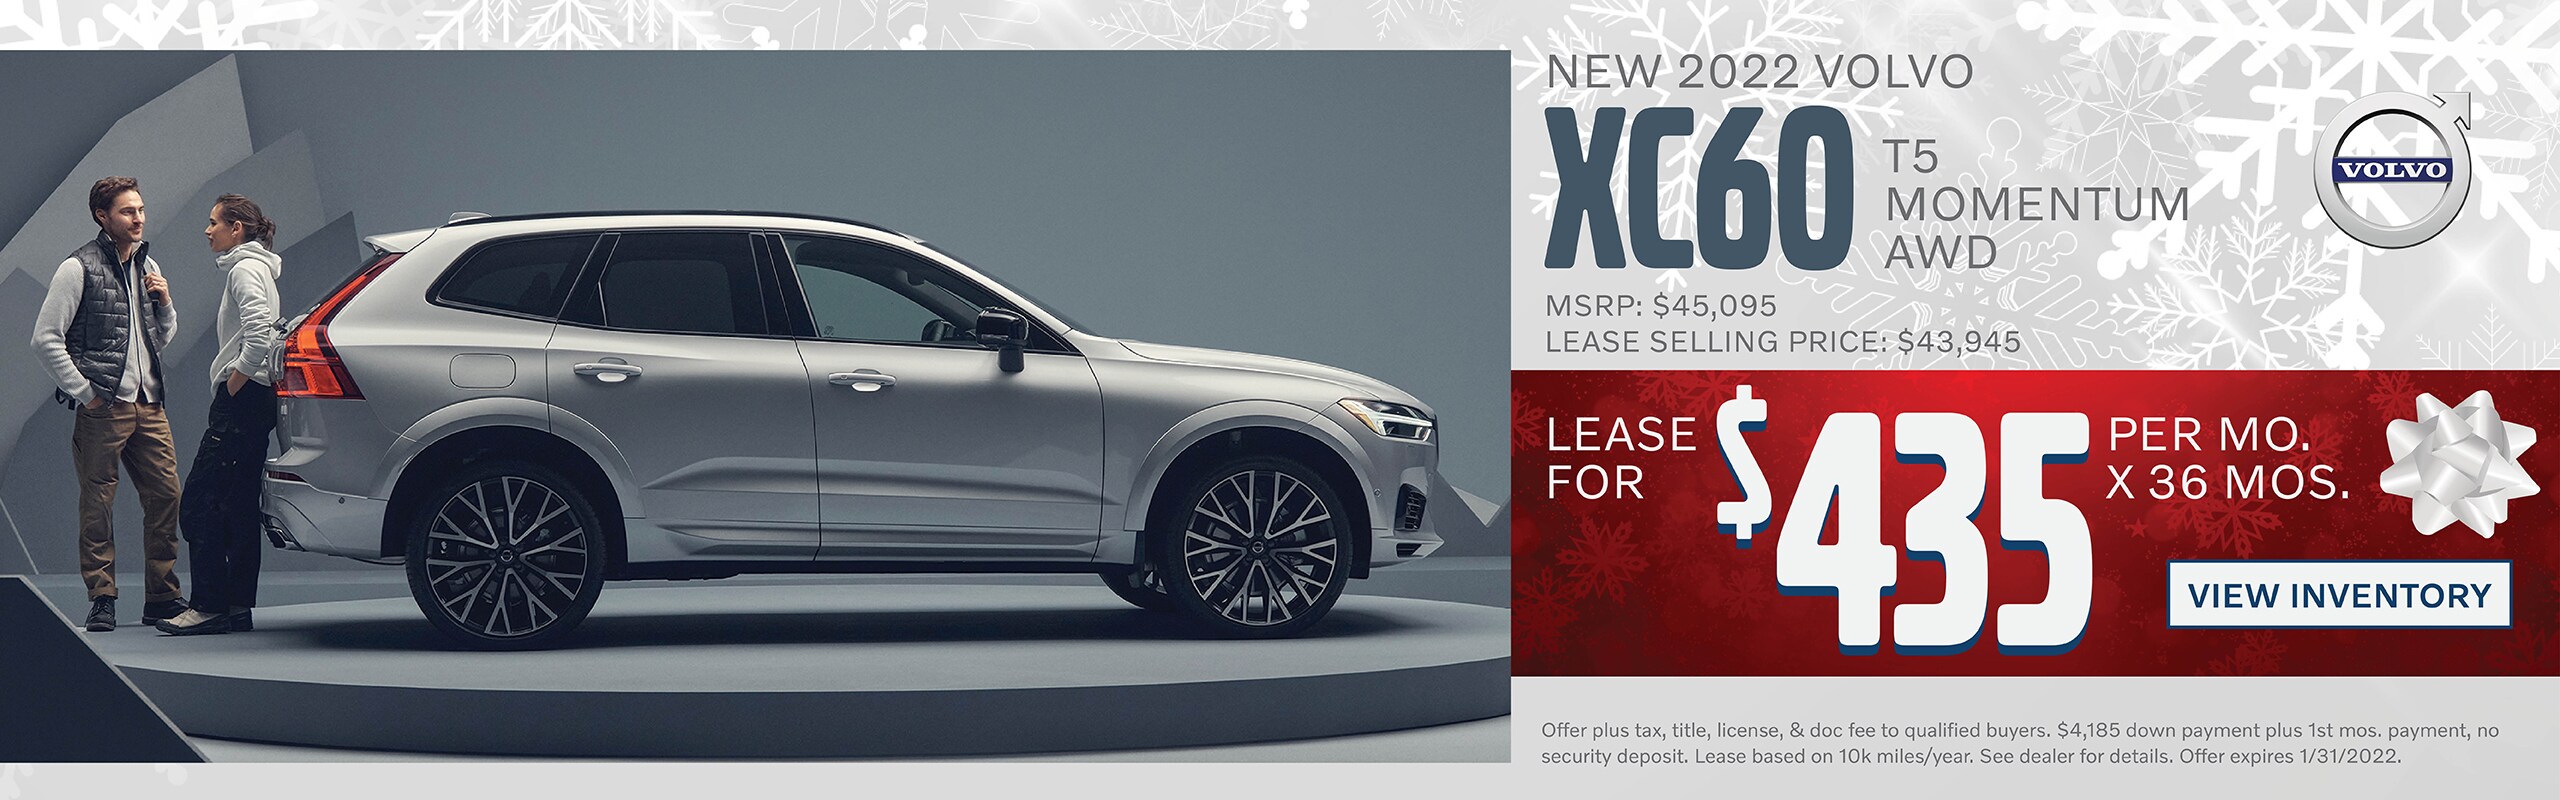 Lease a new 2022 Volvo XC60 T5 Momentum AWD for $435 per month for 36 months - MSRP $45,095 - Lease $43,945